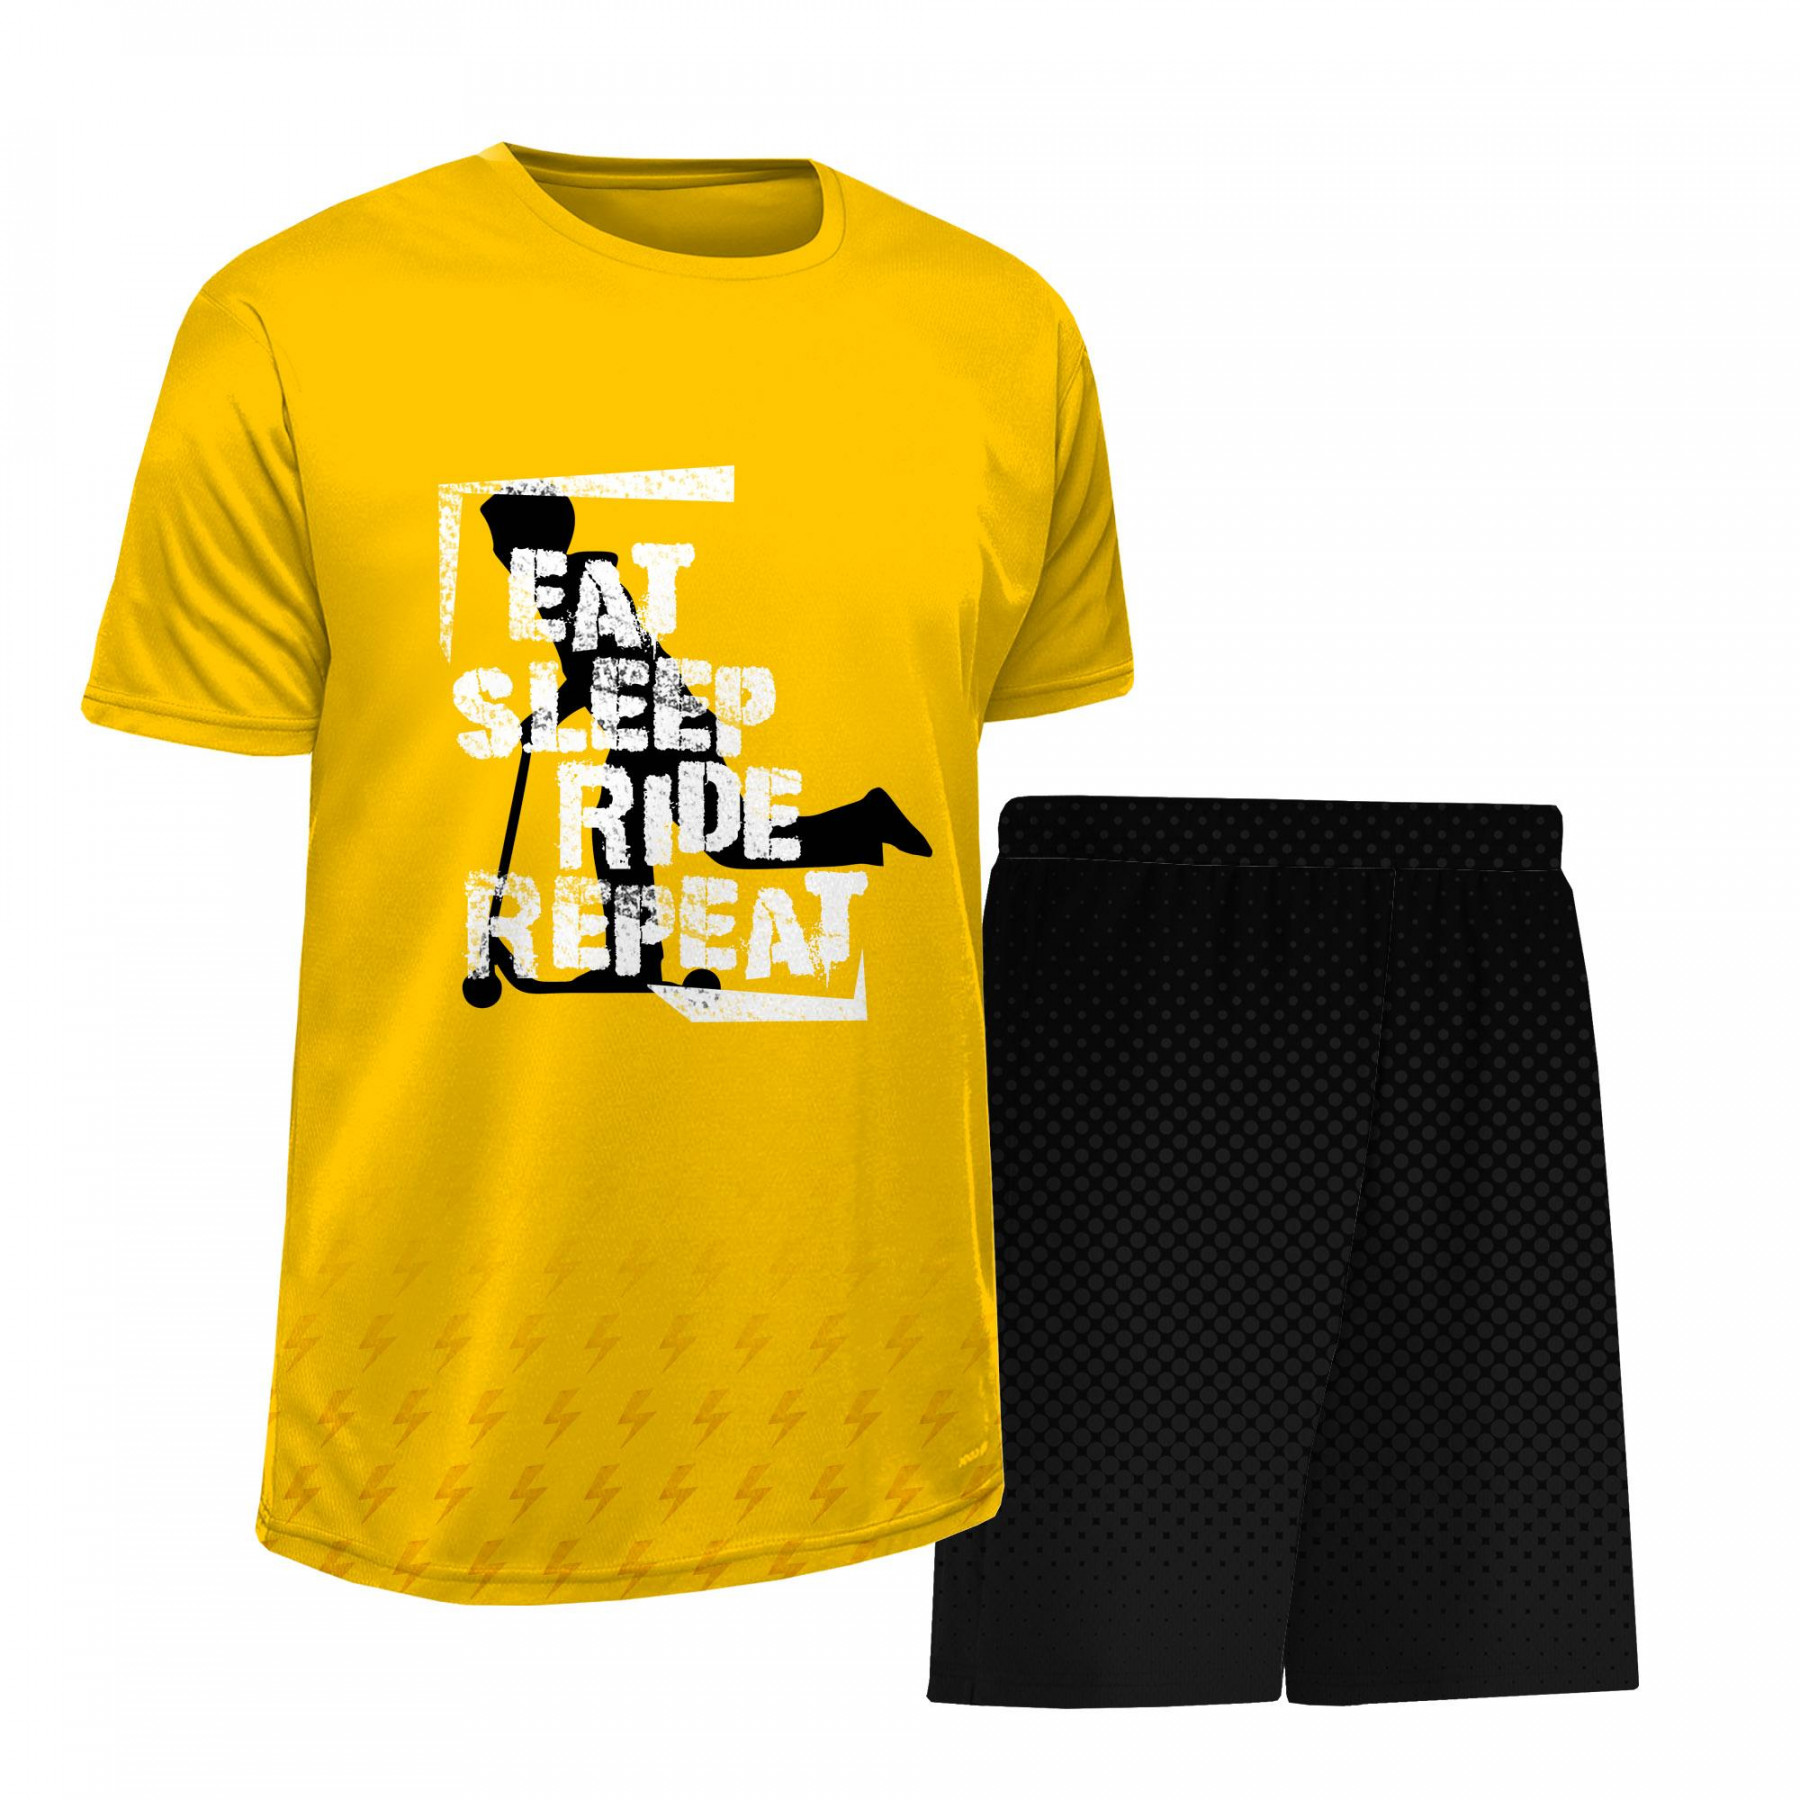 Children's sport outfit "PELE" - EAT SLEEP RIDE REPEAT - sewing set 